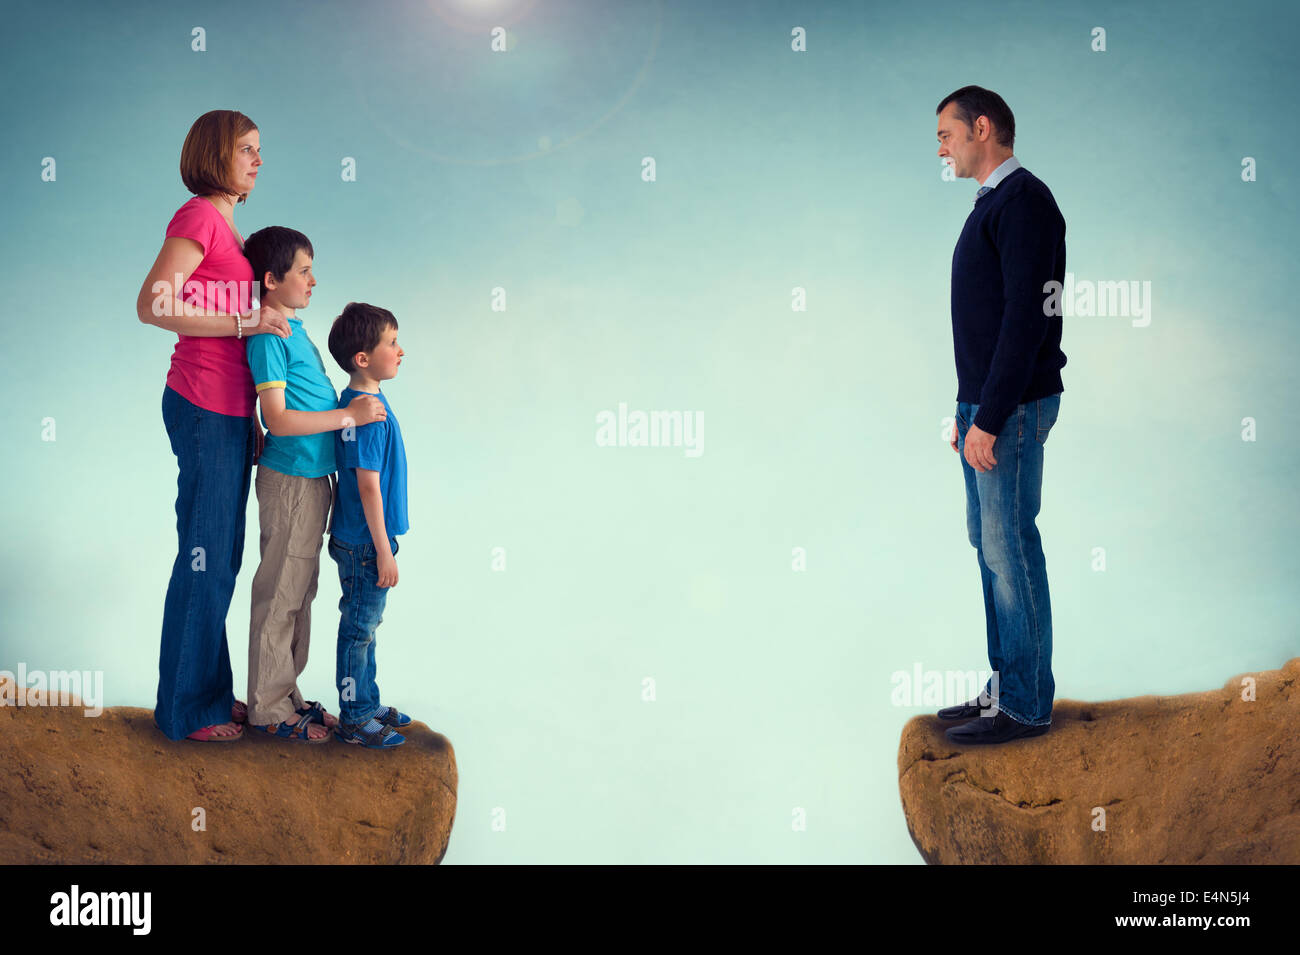 divorce concept family separation man woman and children separated by a chasm Stock Photo